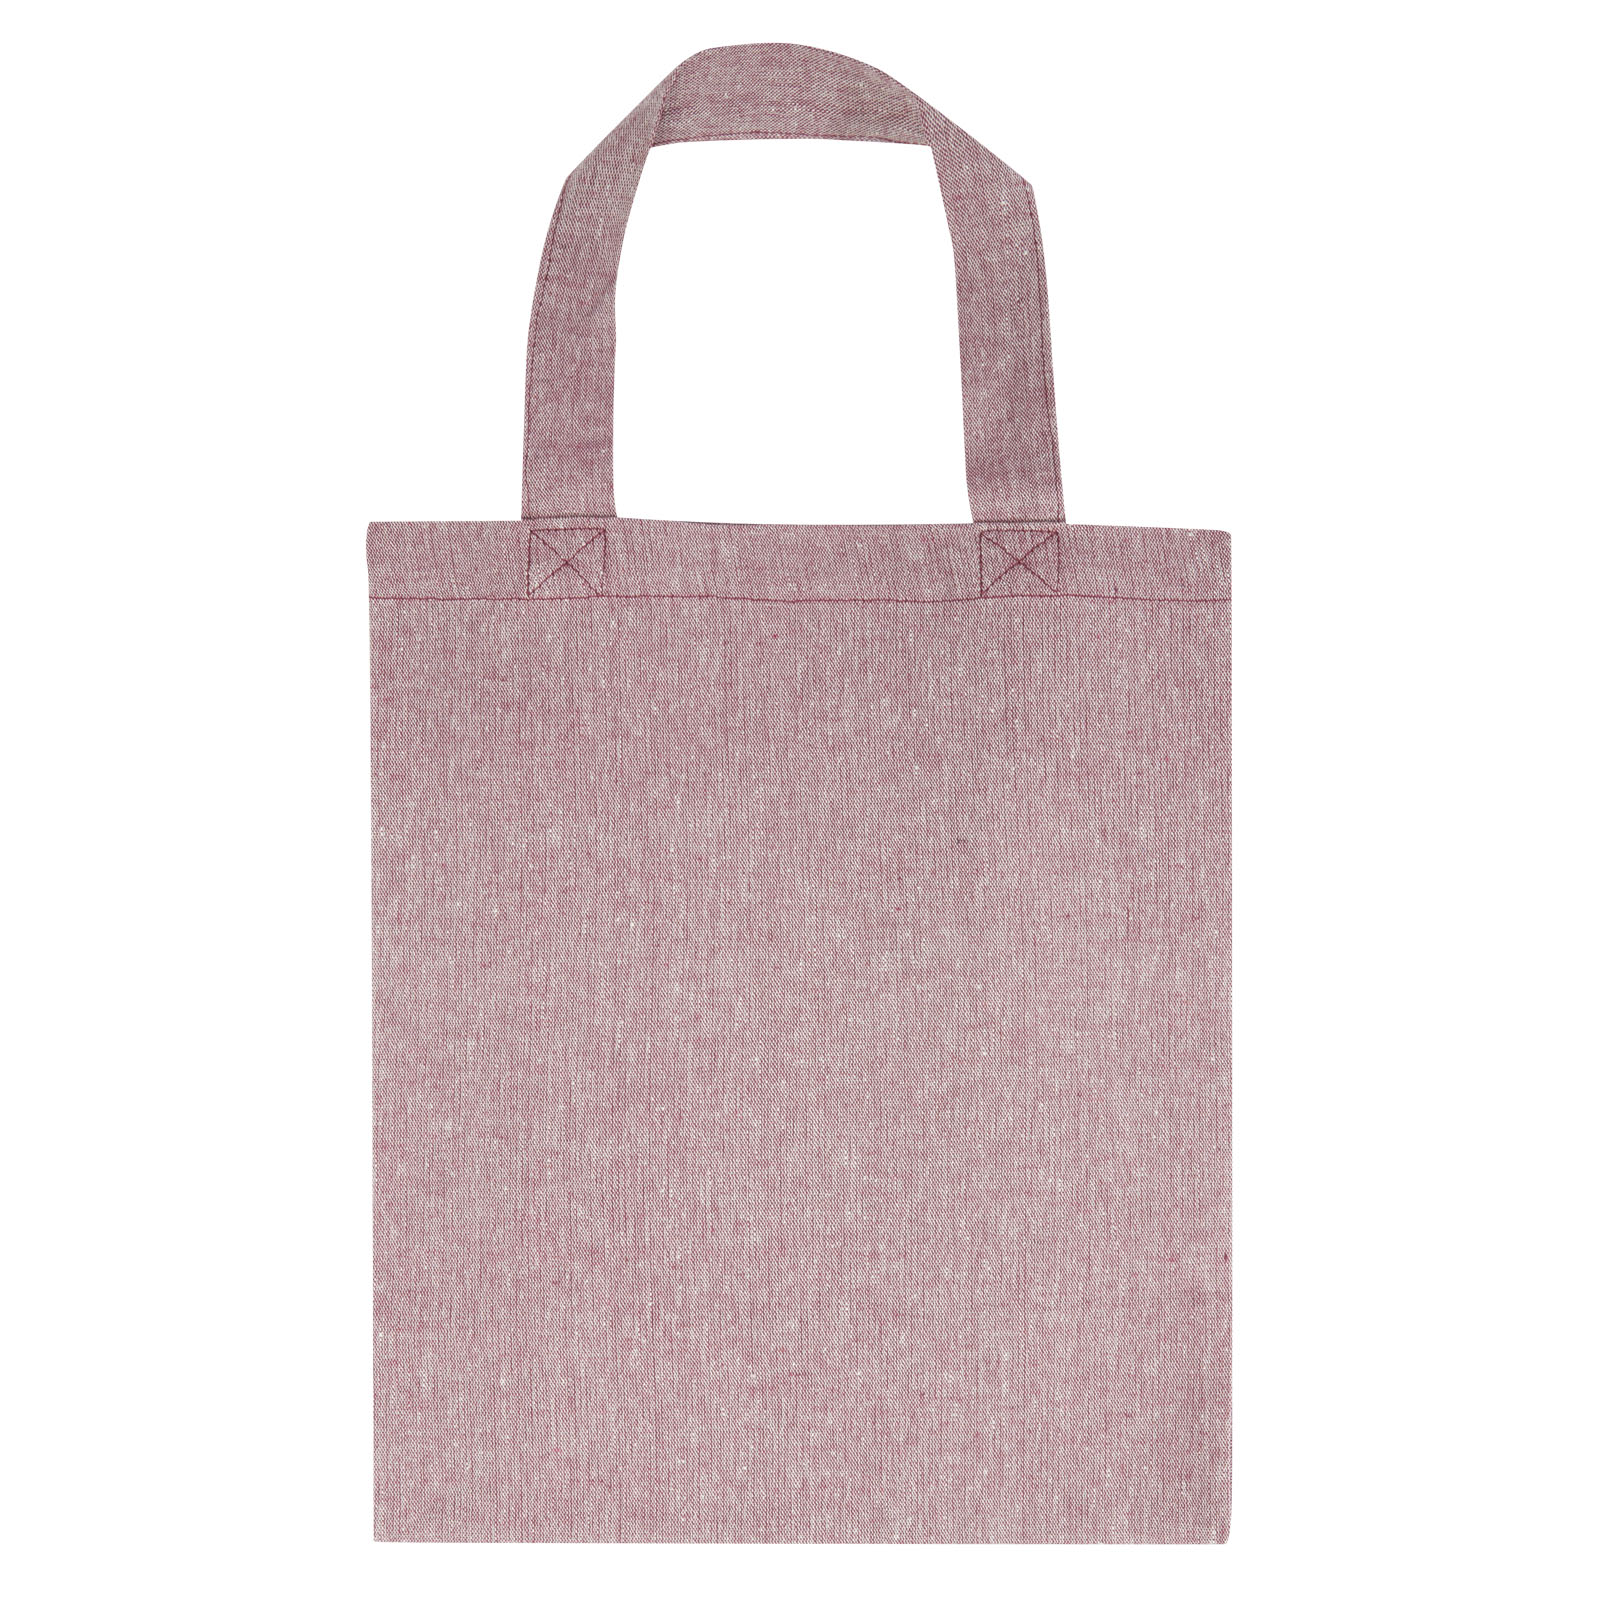 Advertising Shopping & Tote Bags - Pheebs 150 g/m² recycled gusset tote bag 13L - 1